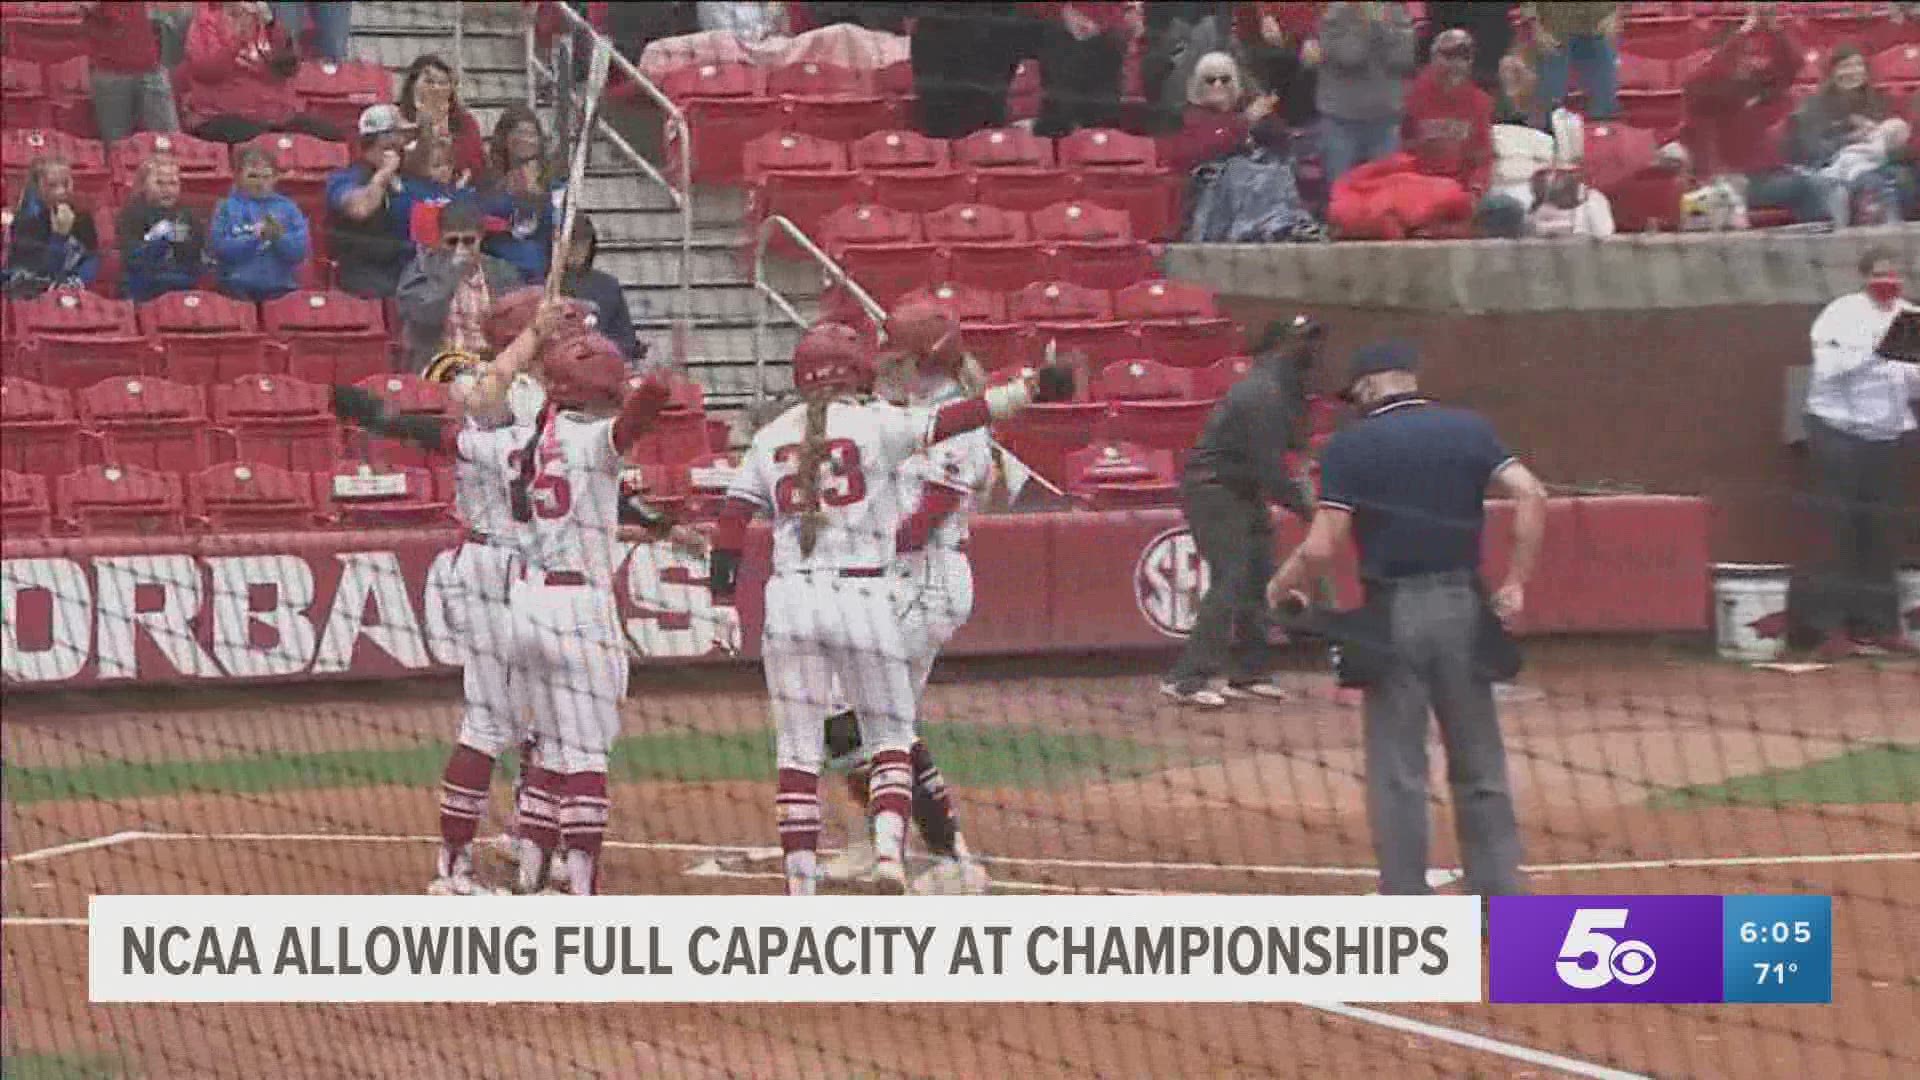 The announcement is good news for Razorback fans hoping to enjoy both the softball and baseball championships at Baum Walker Stadium and Bogle Park.